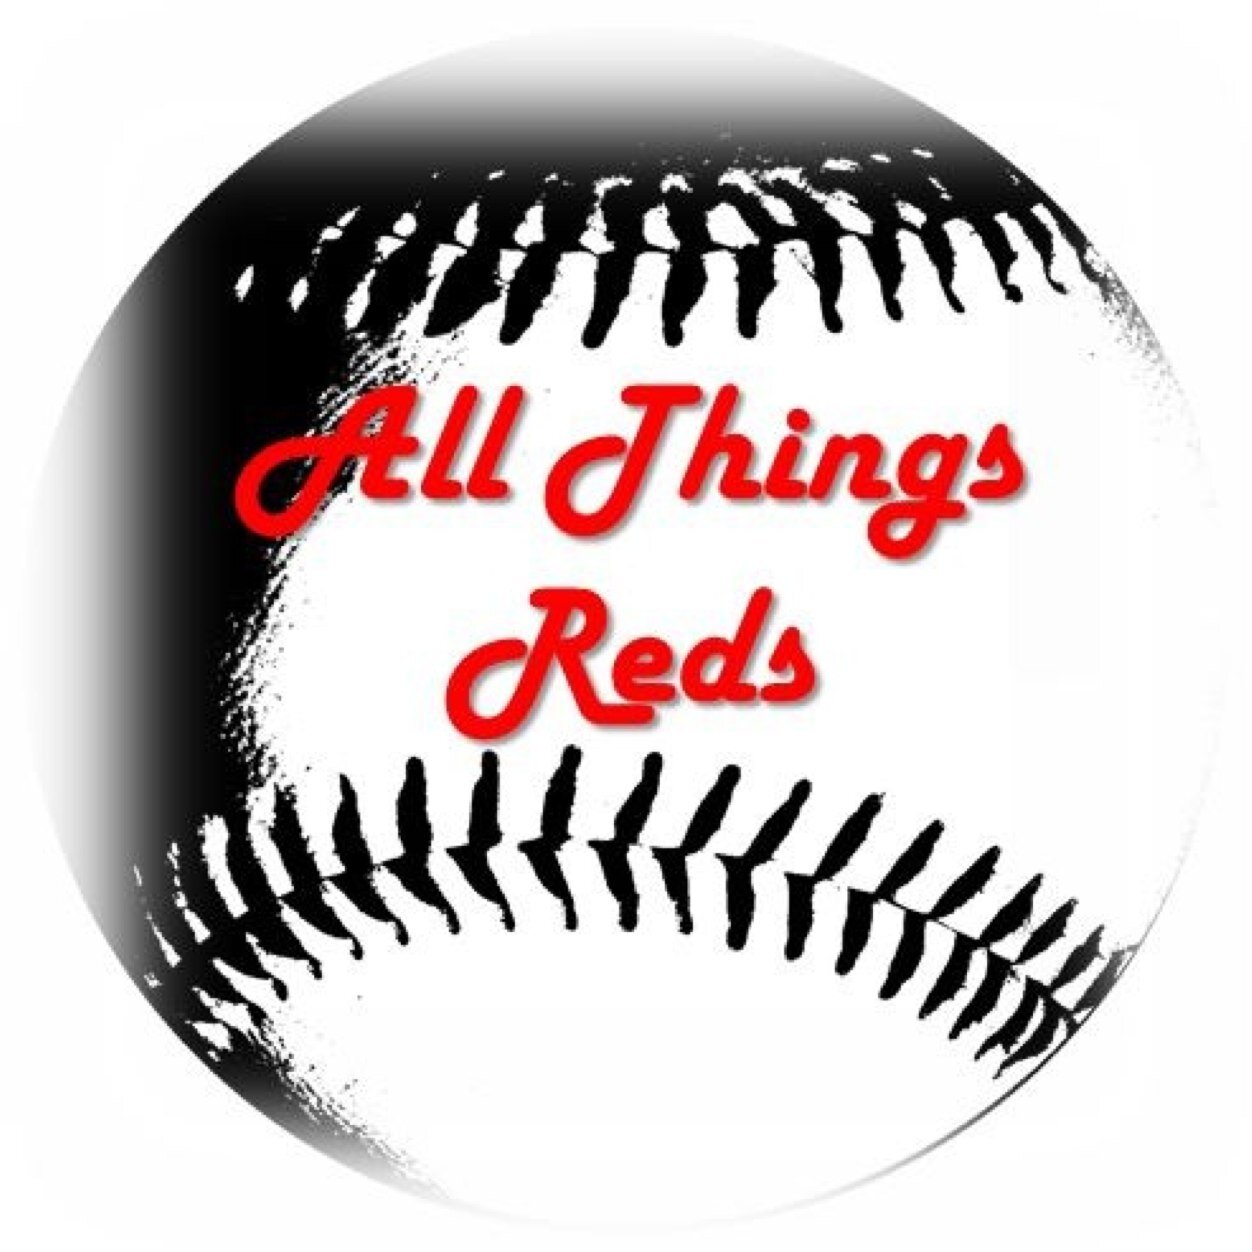 A Twitter all about the Cincinnati Reds. Start following the blog, the address is below. This twitter page is not affiliated with the Reds